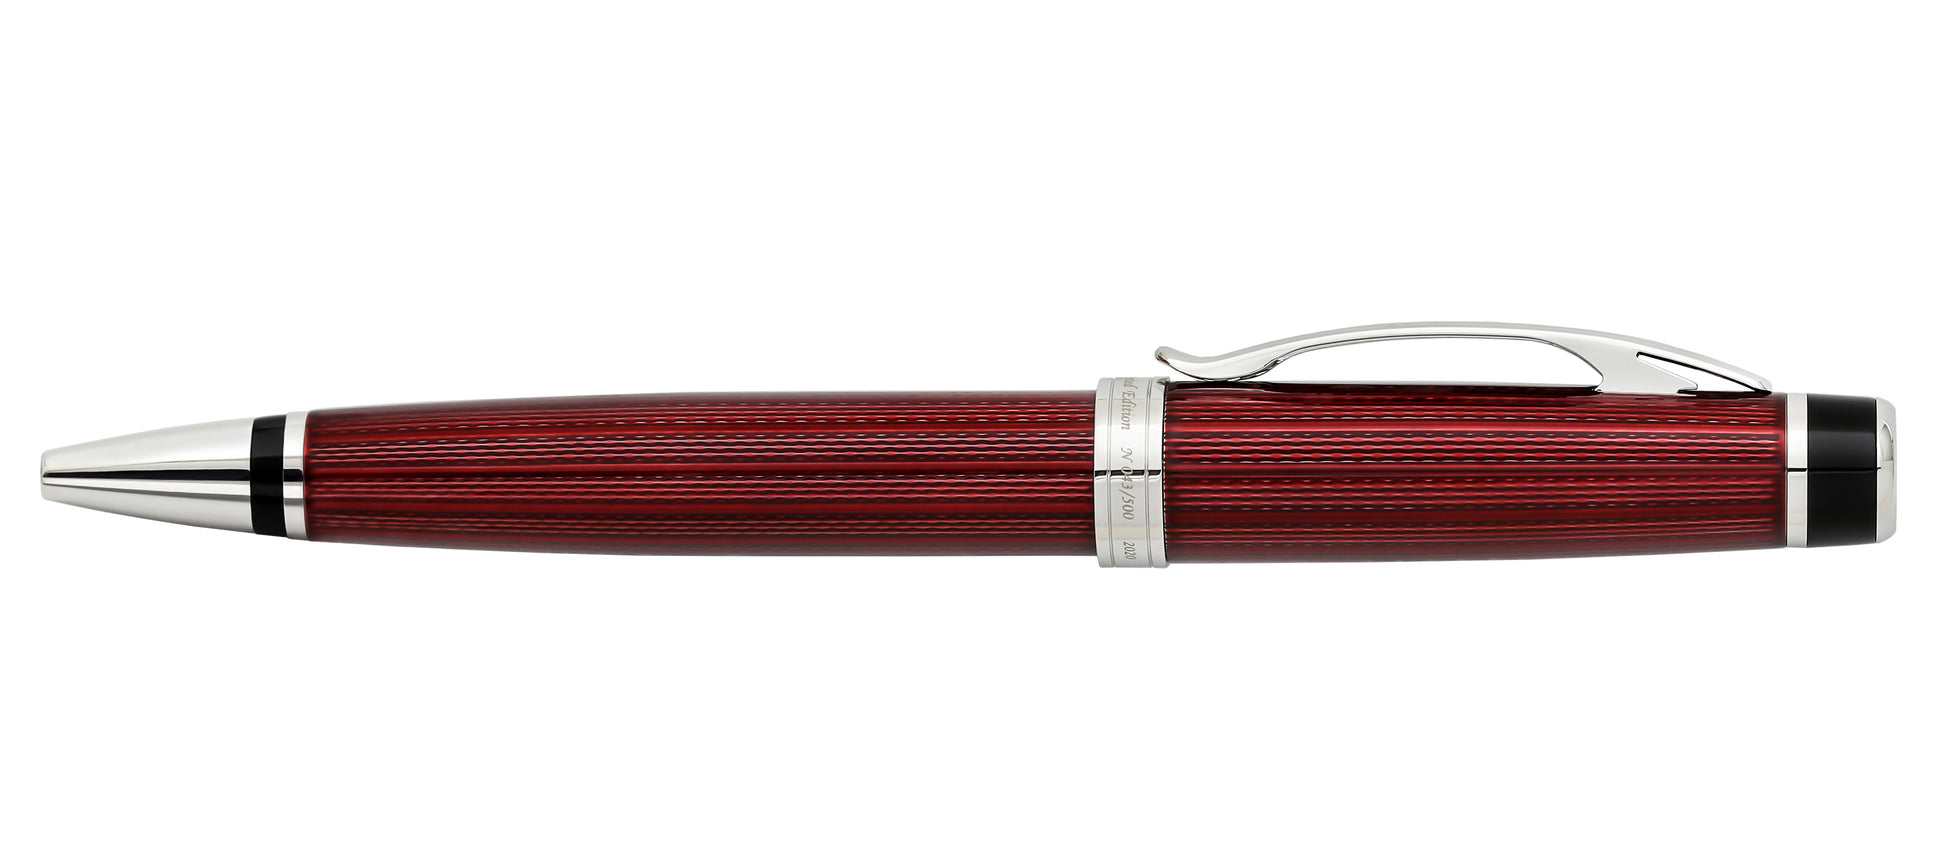 Xezo - Side view of the Incognito Burgundy B ballpoint pen